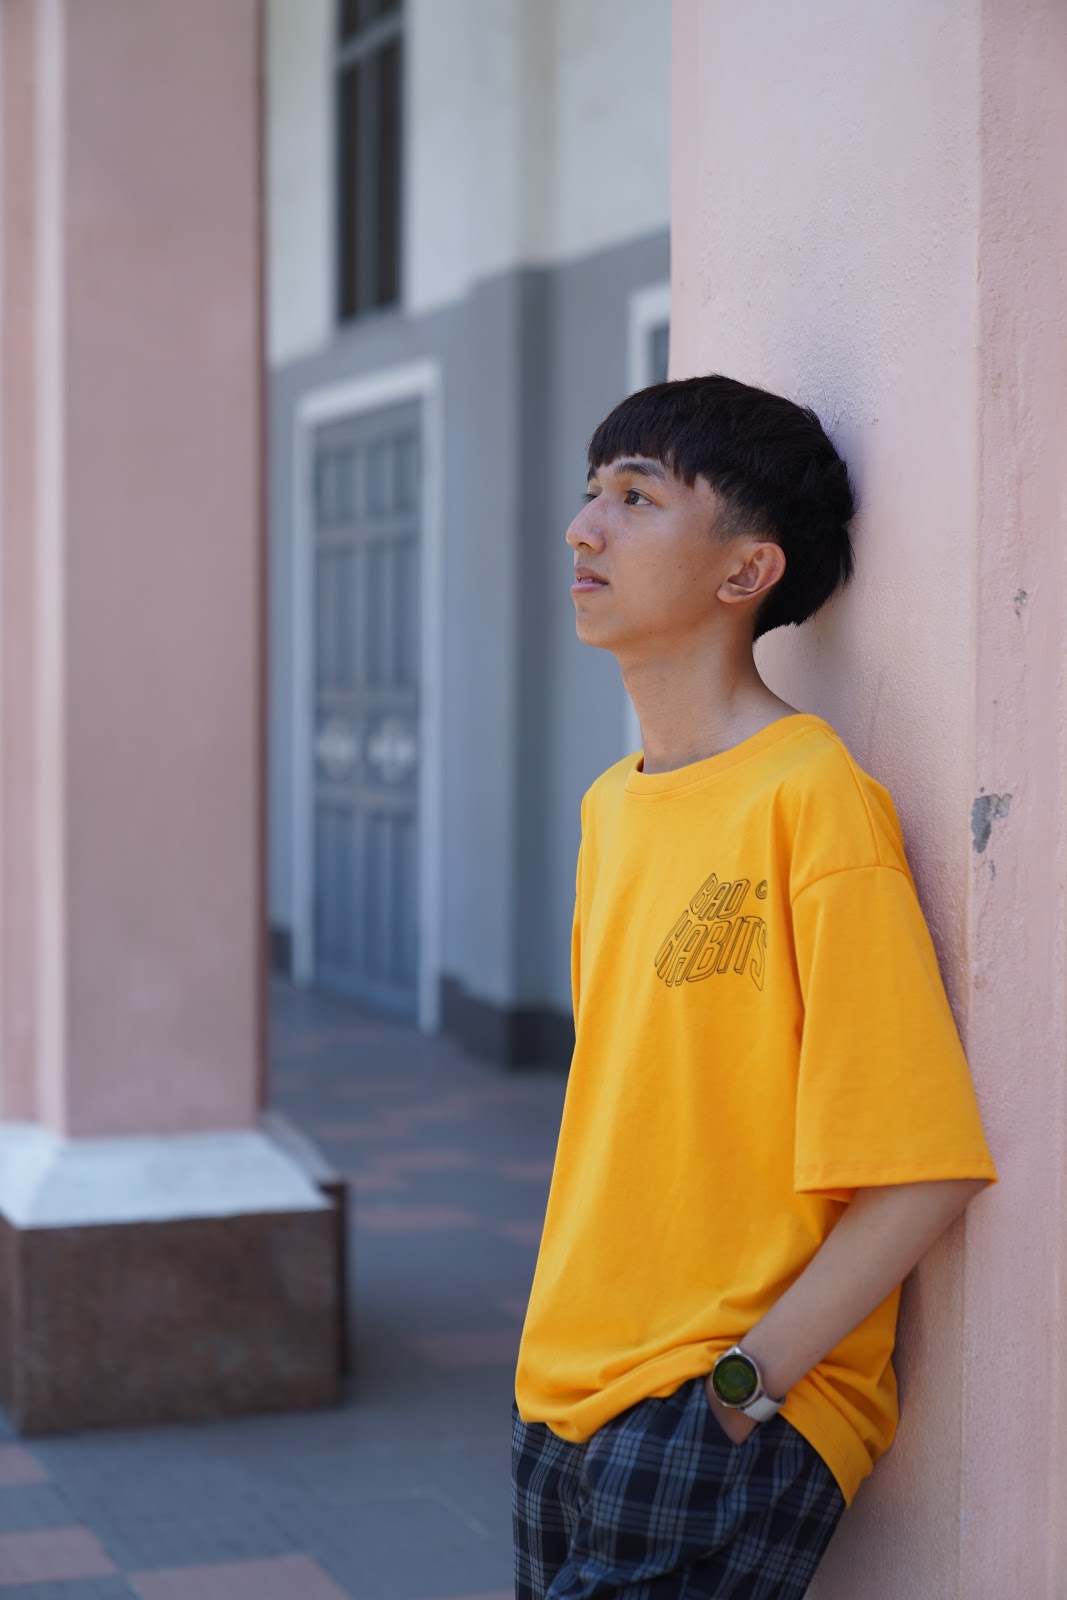 Interview with the Young Vietnamese Music Artist 